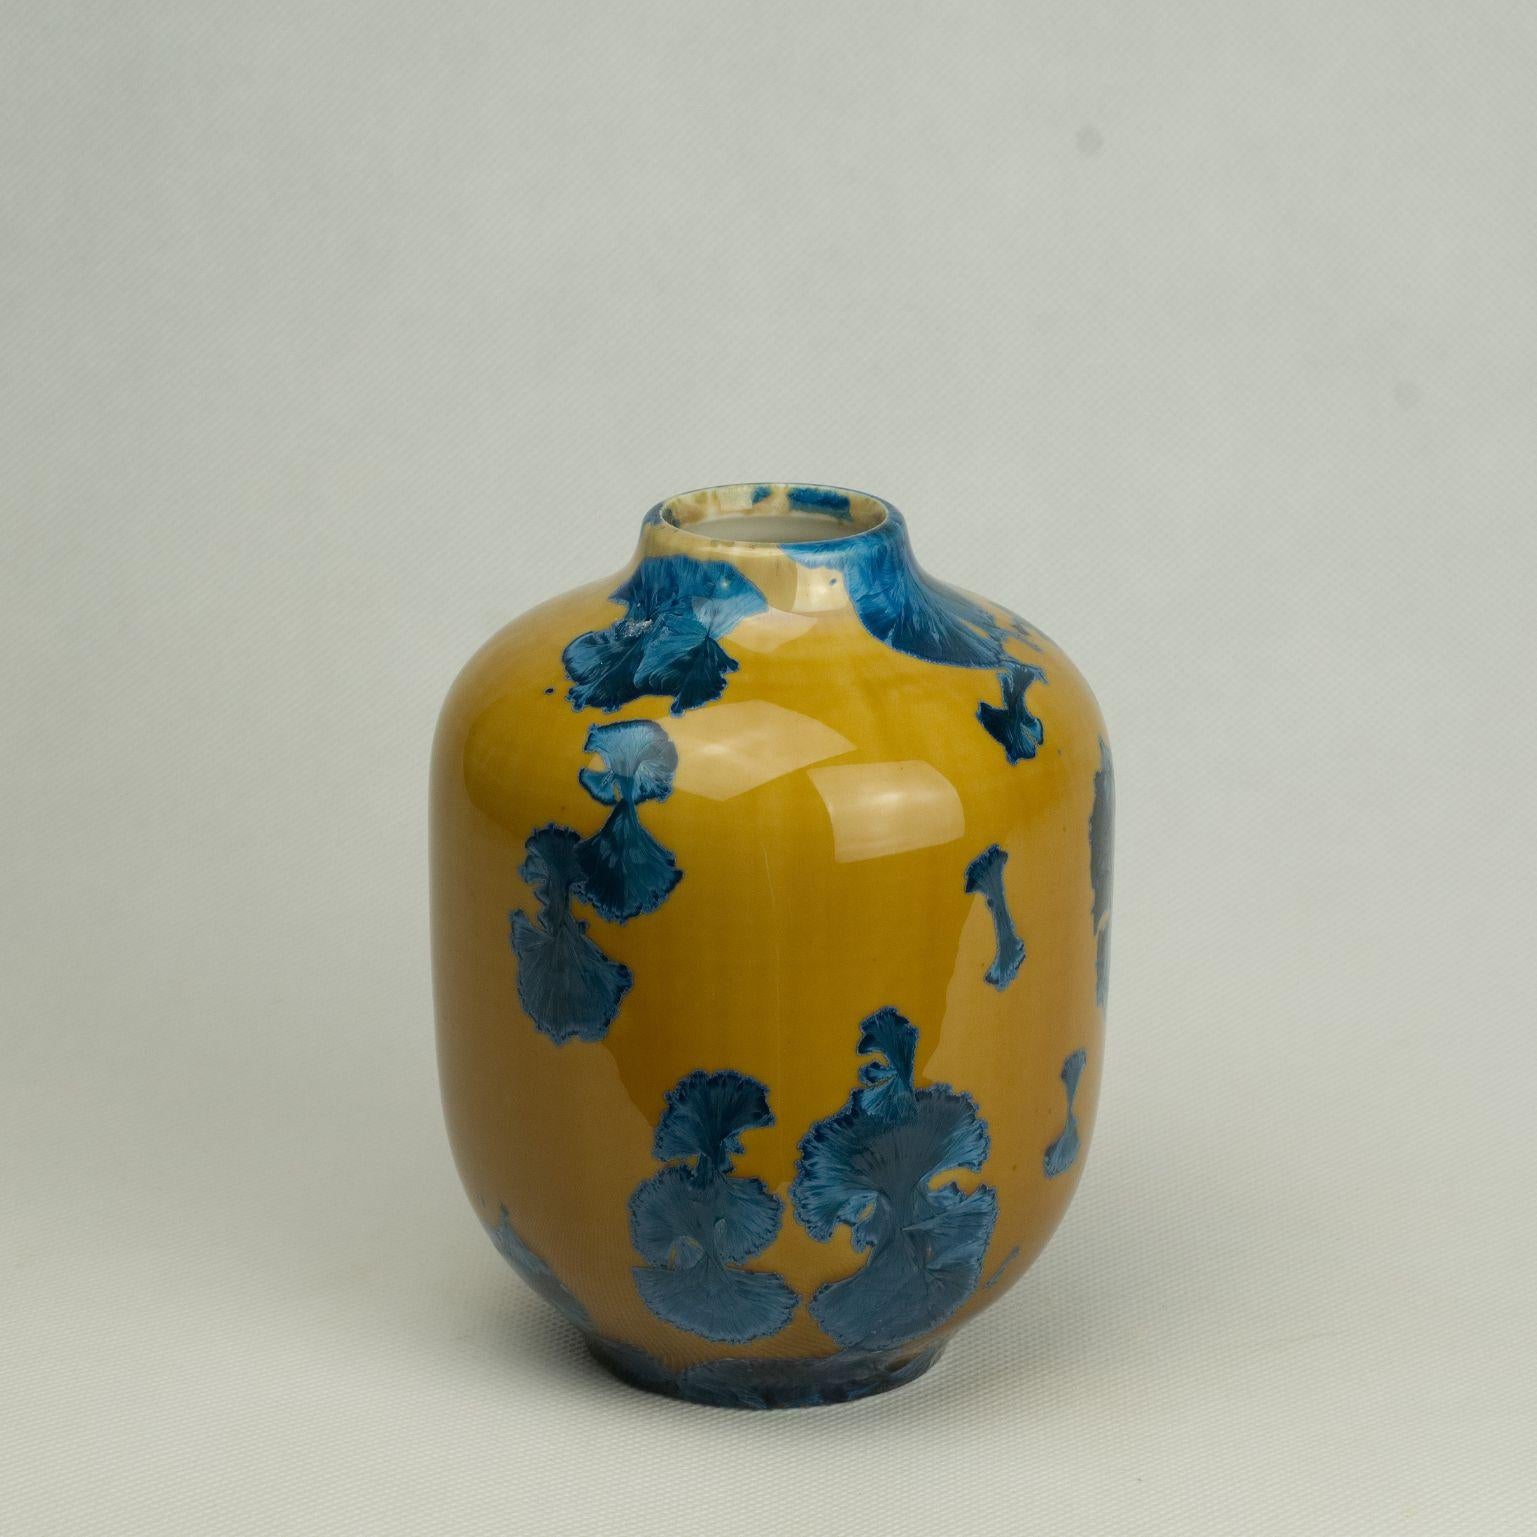 Volume 1 vase by Milan Pekar
Dimensions: D11 x H15 cm
Materials: Glaze, porcelain

Handmade in the Czech Republic. 

Also available: Different colors and patterns

Established own studio August 2009 – Focus mainly on porcelain, developing own